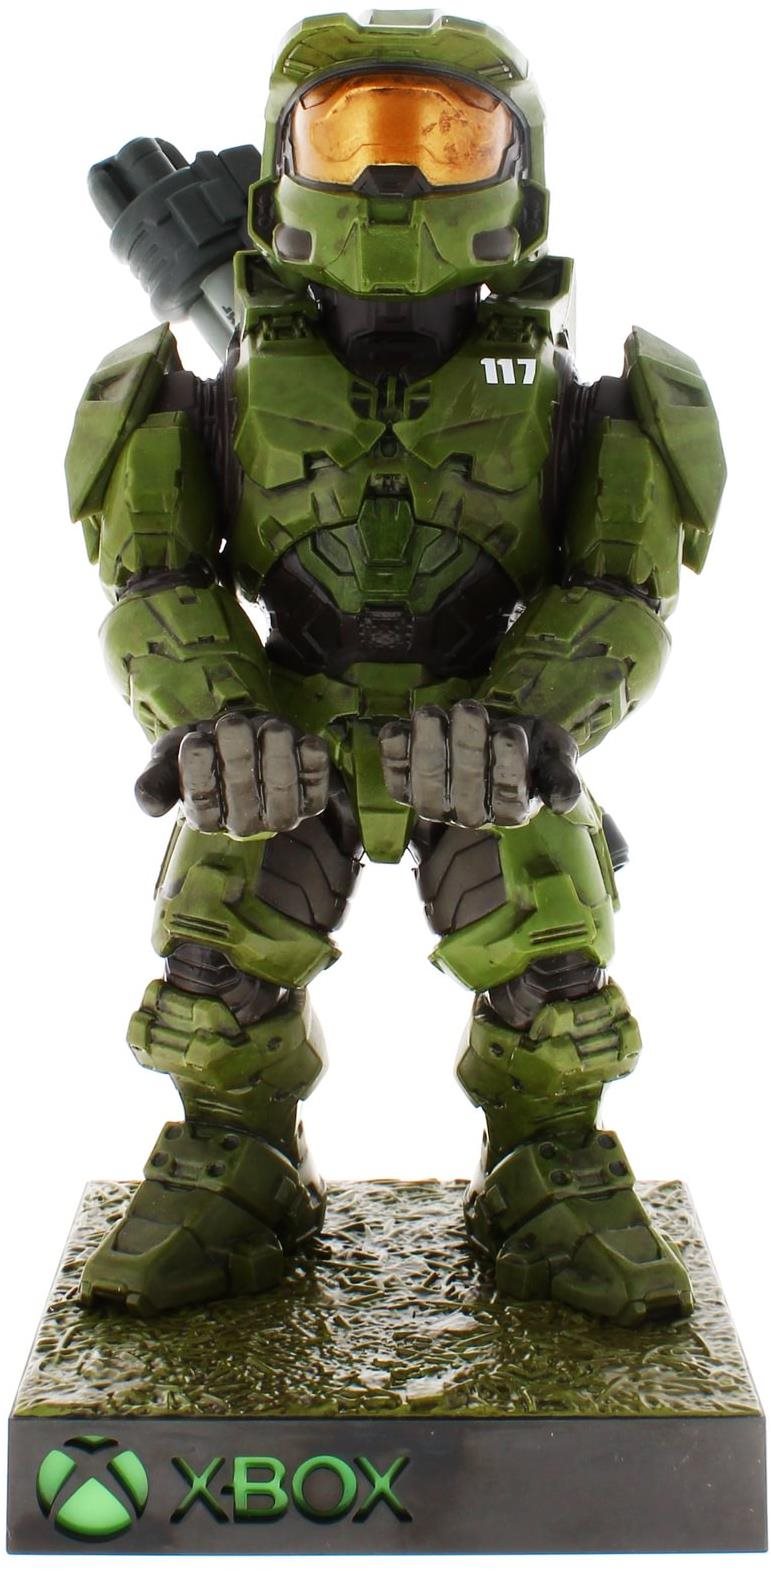 Cable Guys - HALO - Master Chief Exclusive Variant